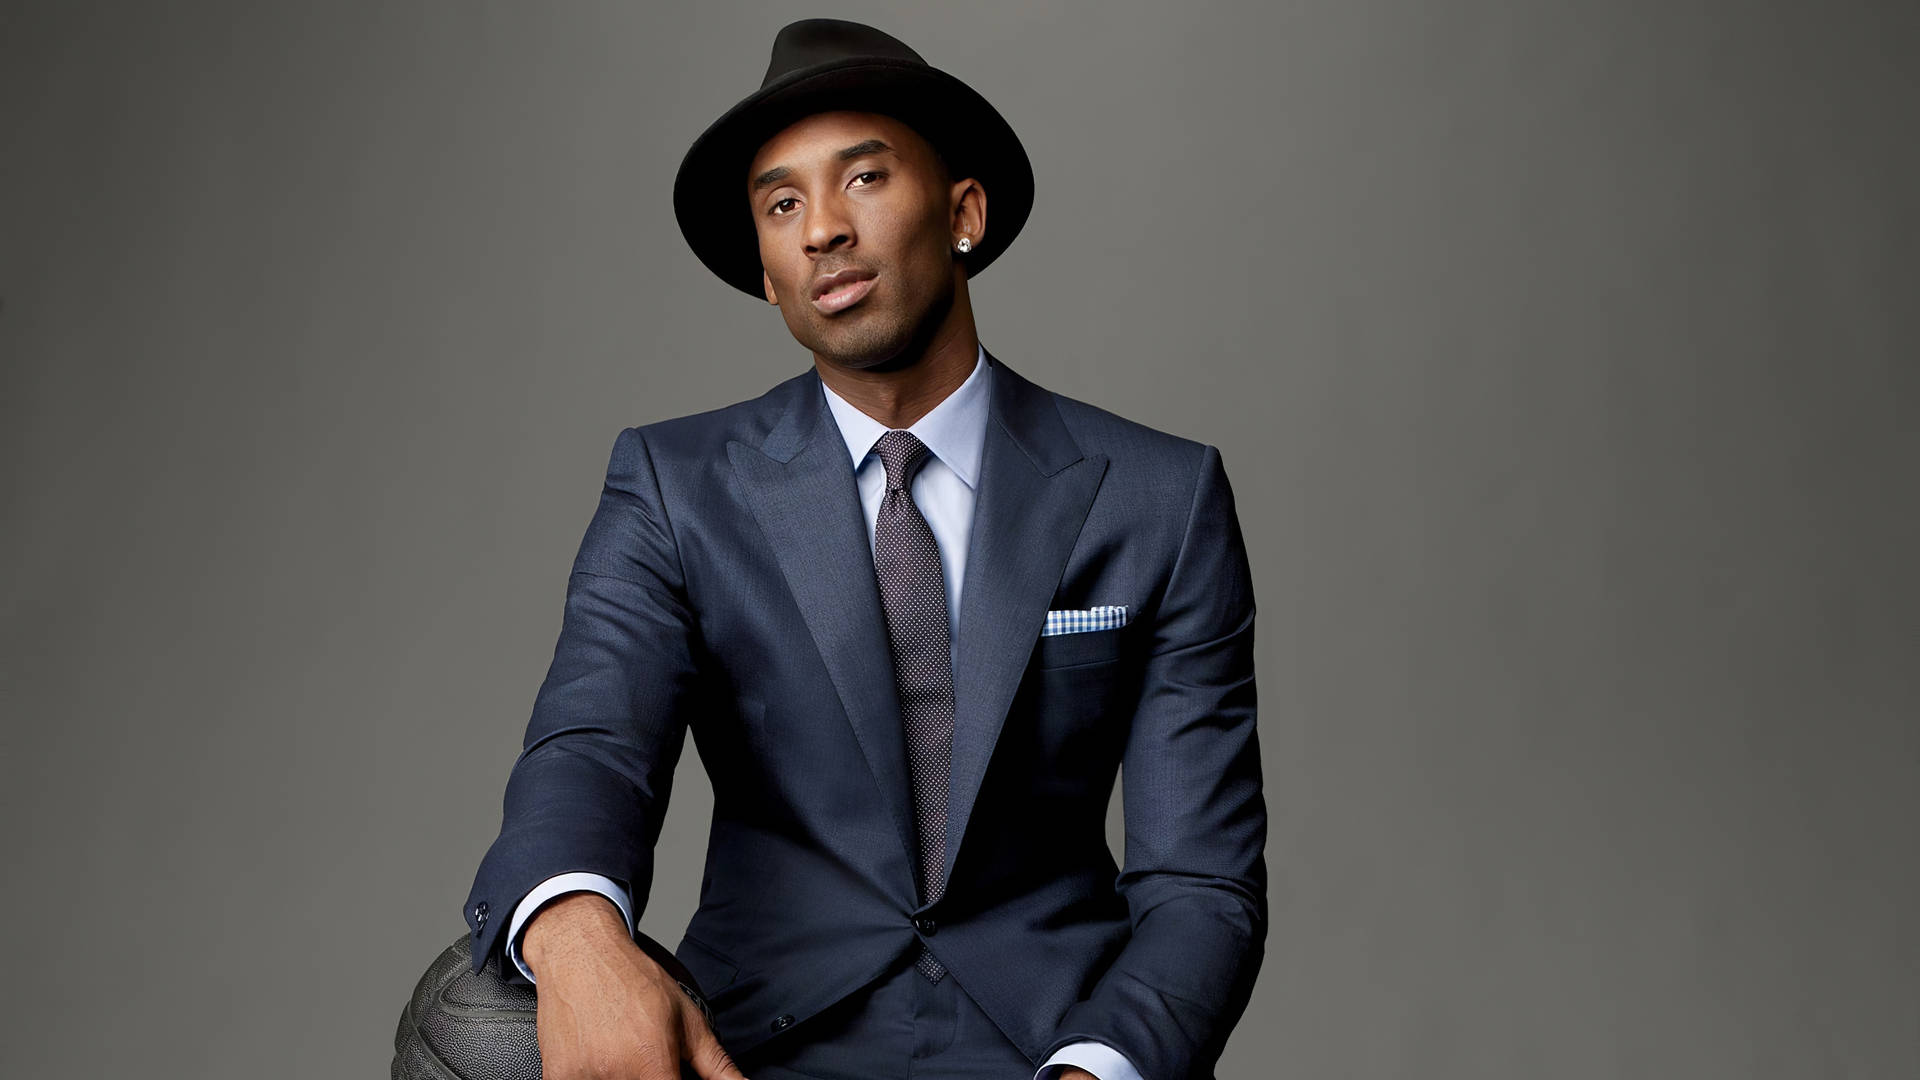 Kobe Bryant is all smiles in a suit Wallpaper